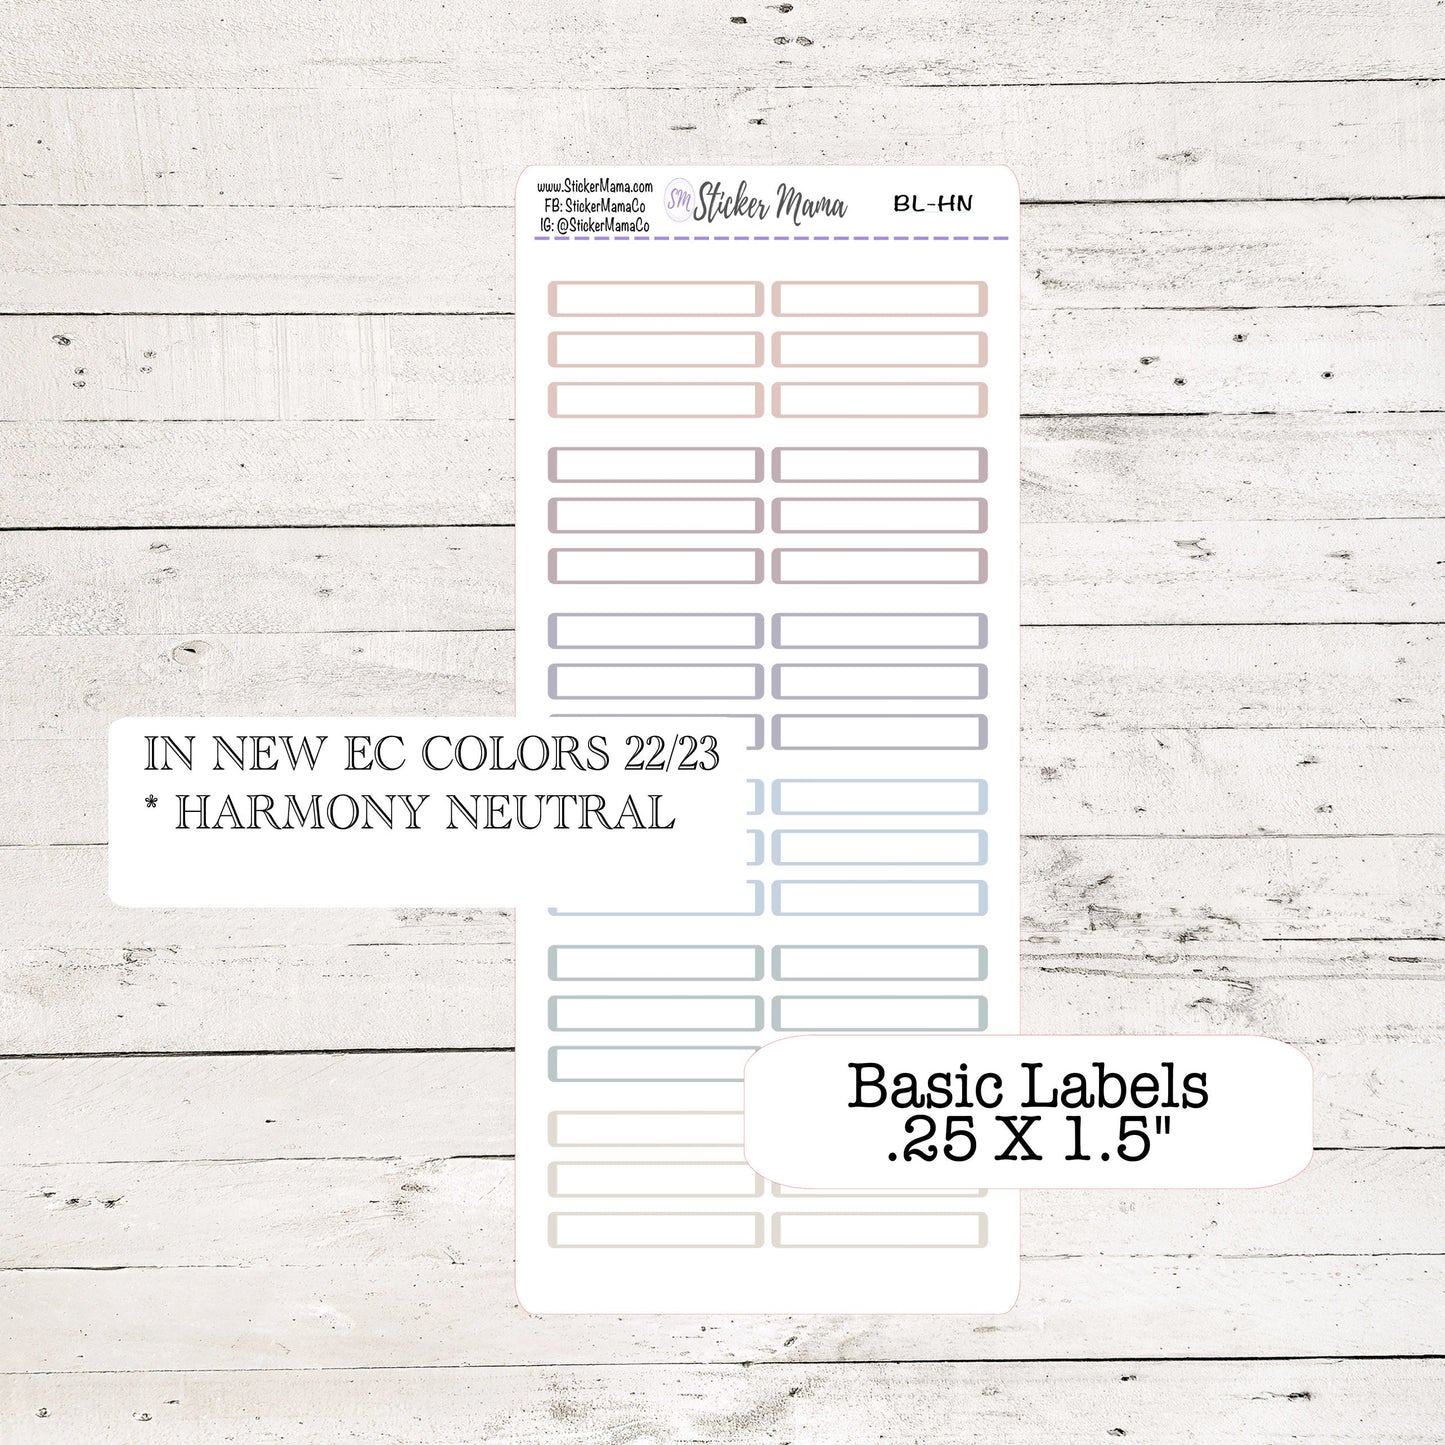 NEW ERIN CONDREN Colors - Update Basic Labels -  In Bloom, Harmony, Harmony Neutral, Colorblends - Basic Labels - Planner Stickers